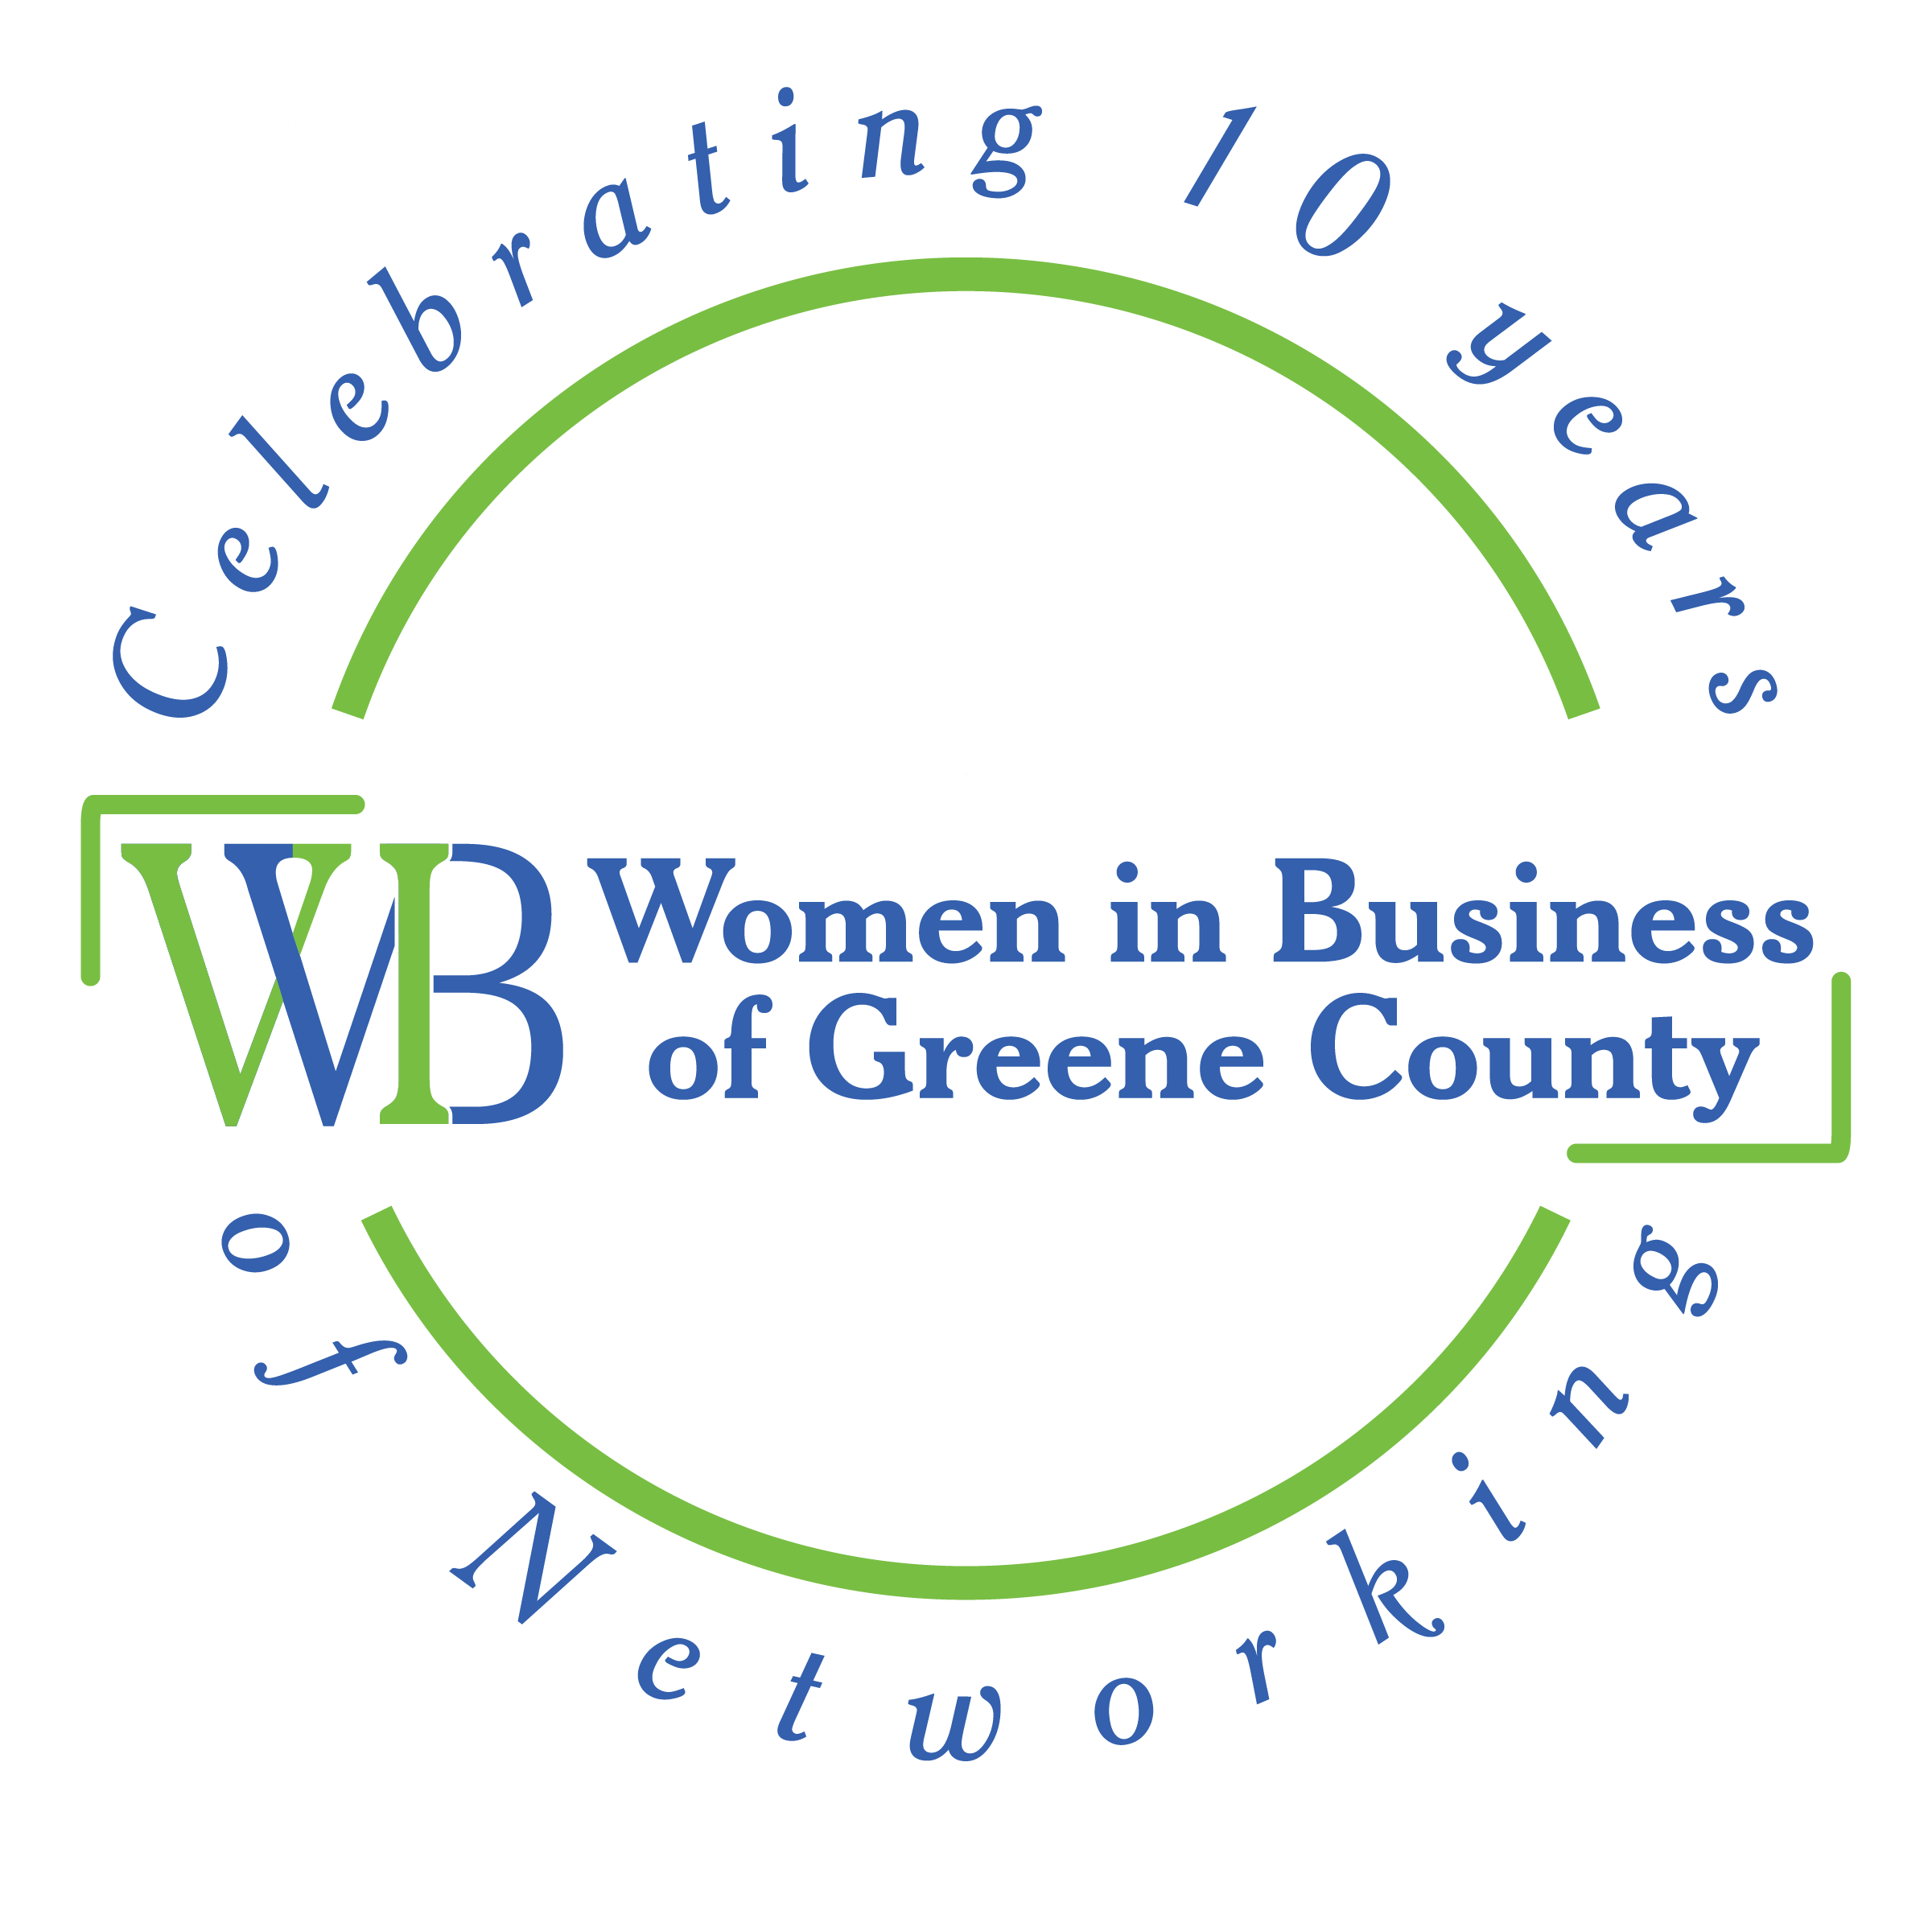 Nicole Sturk of SISCA to Speak at Women in Business on May 19, 2022